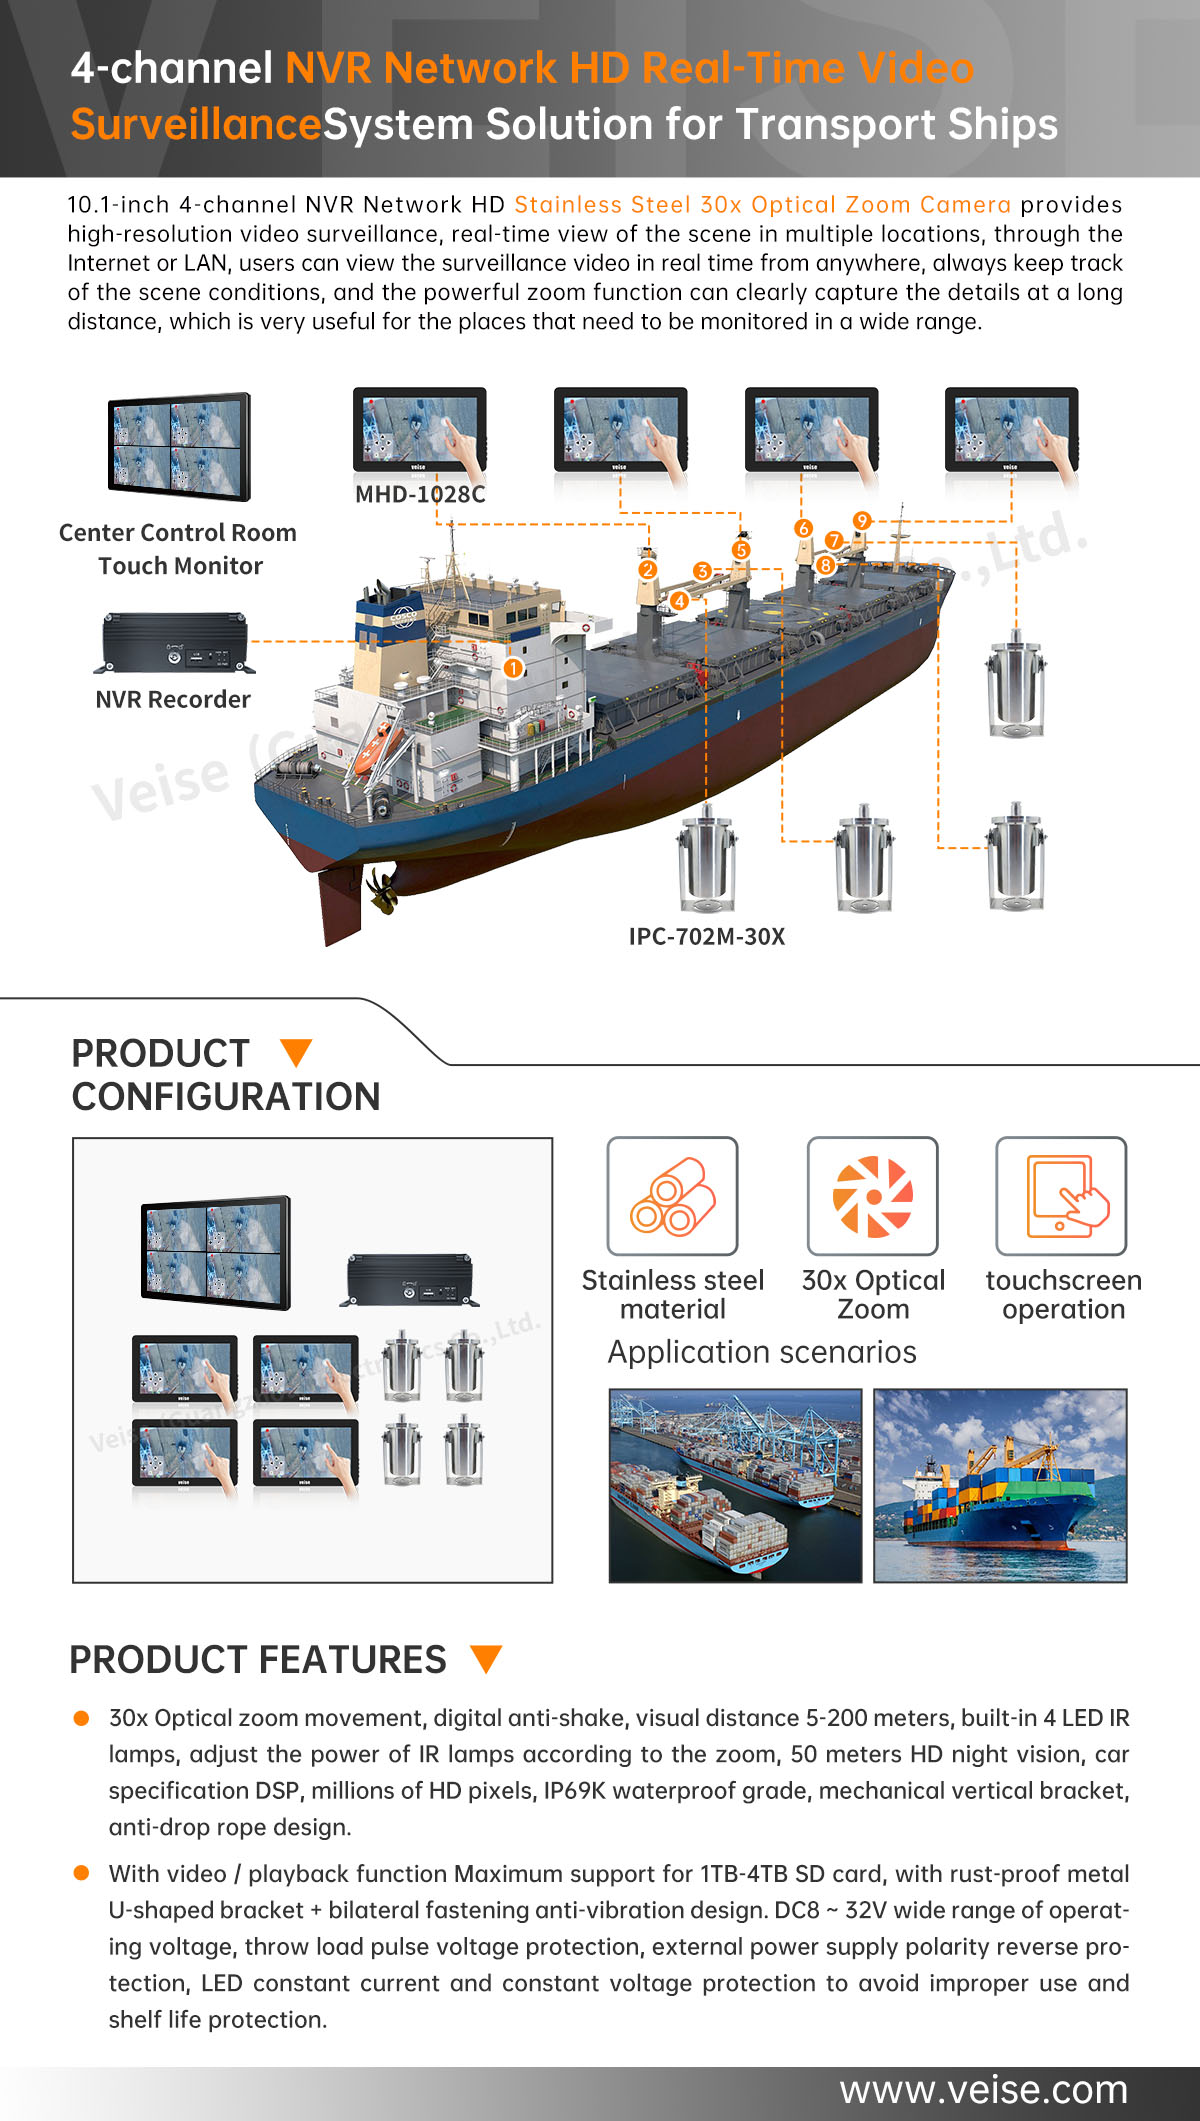 4-channel NVR Network HD Real-Time Video Surveillance System Solution for Transport Ships